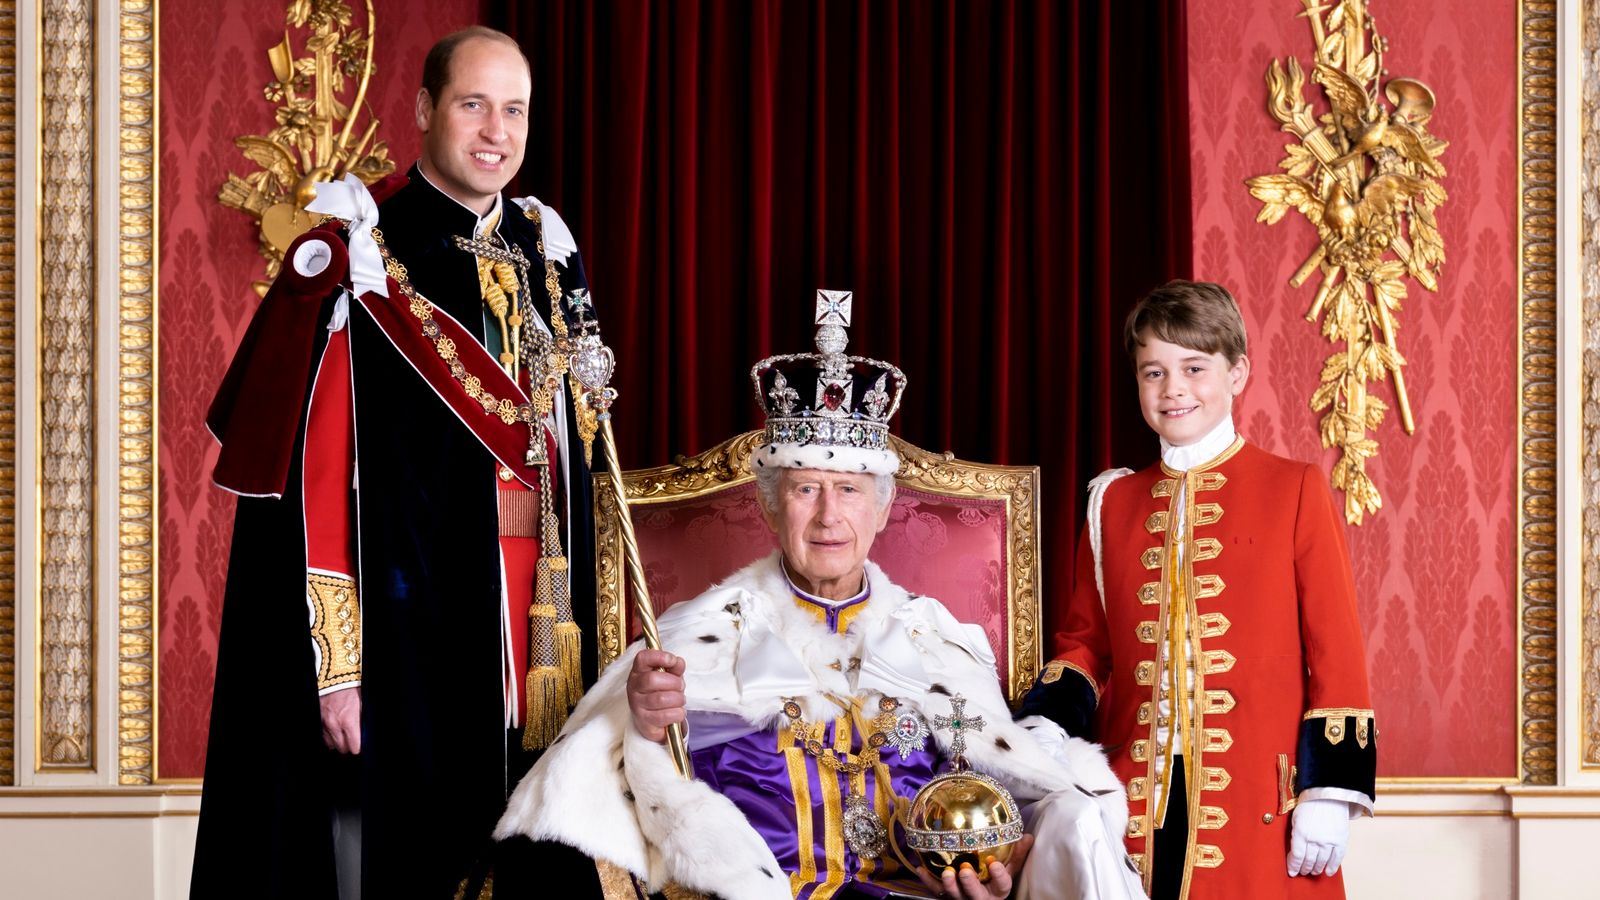 The King and his heirs: Charles pictured with Princes William and George in new portrait for coronation